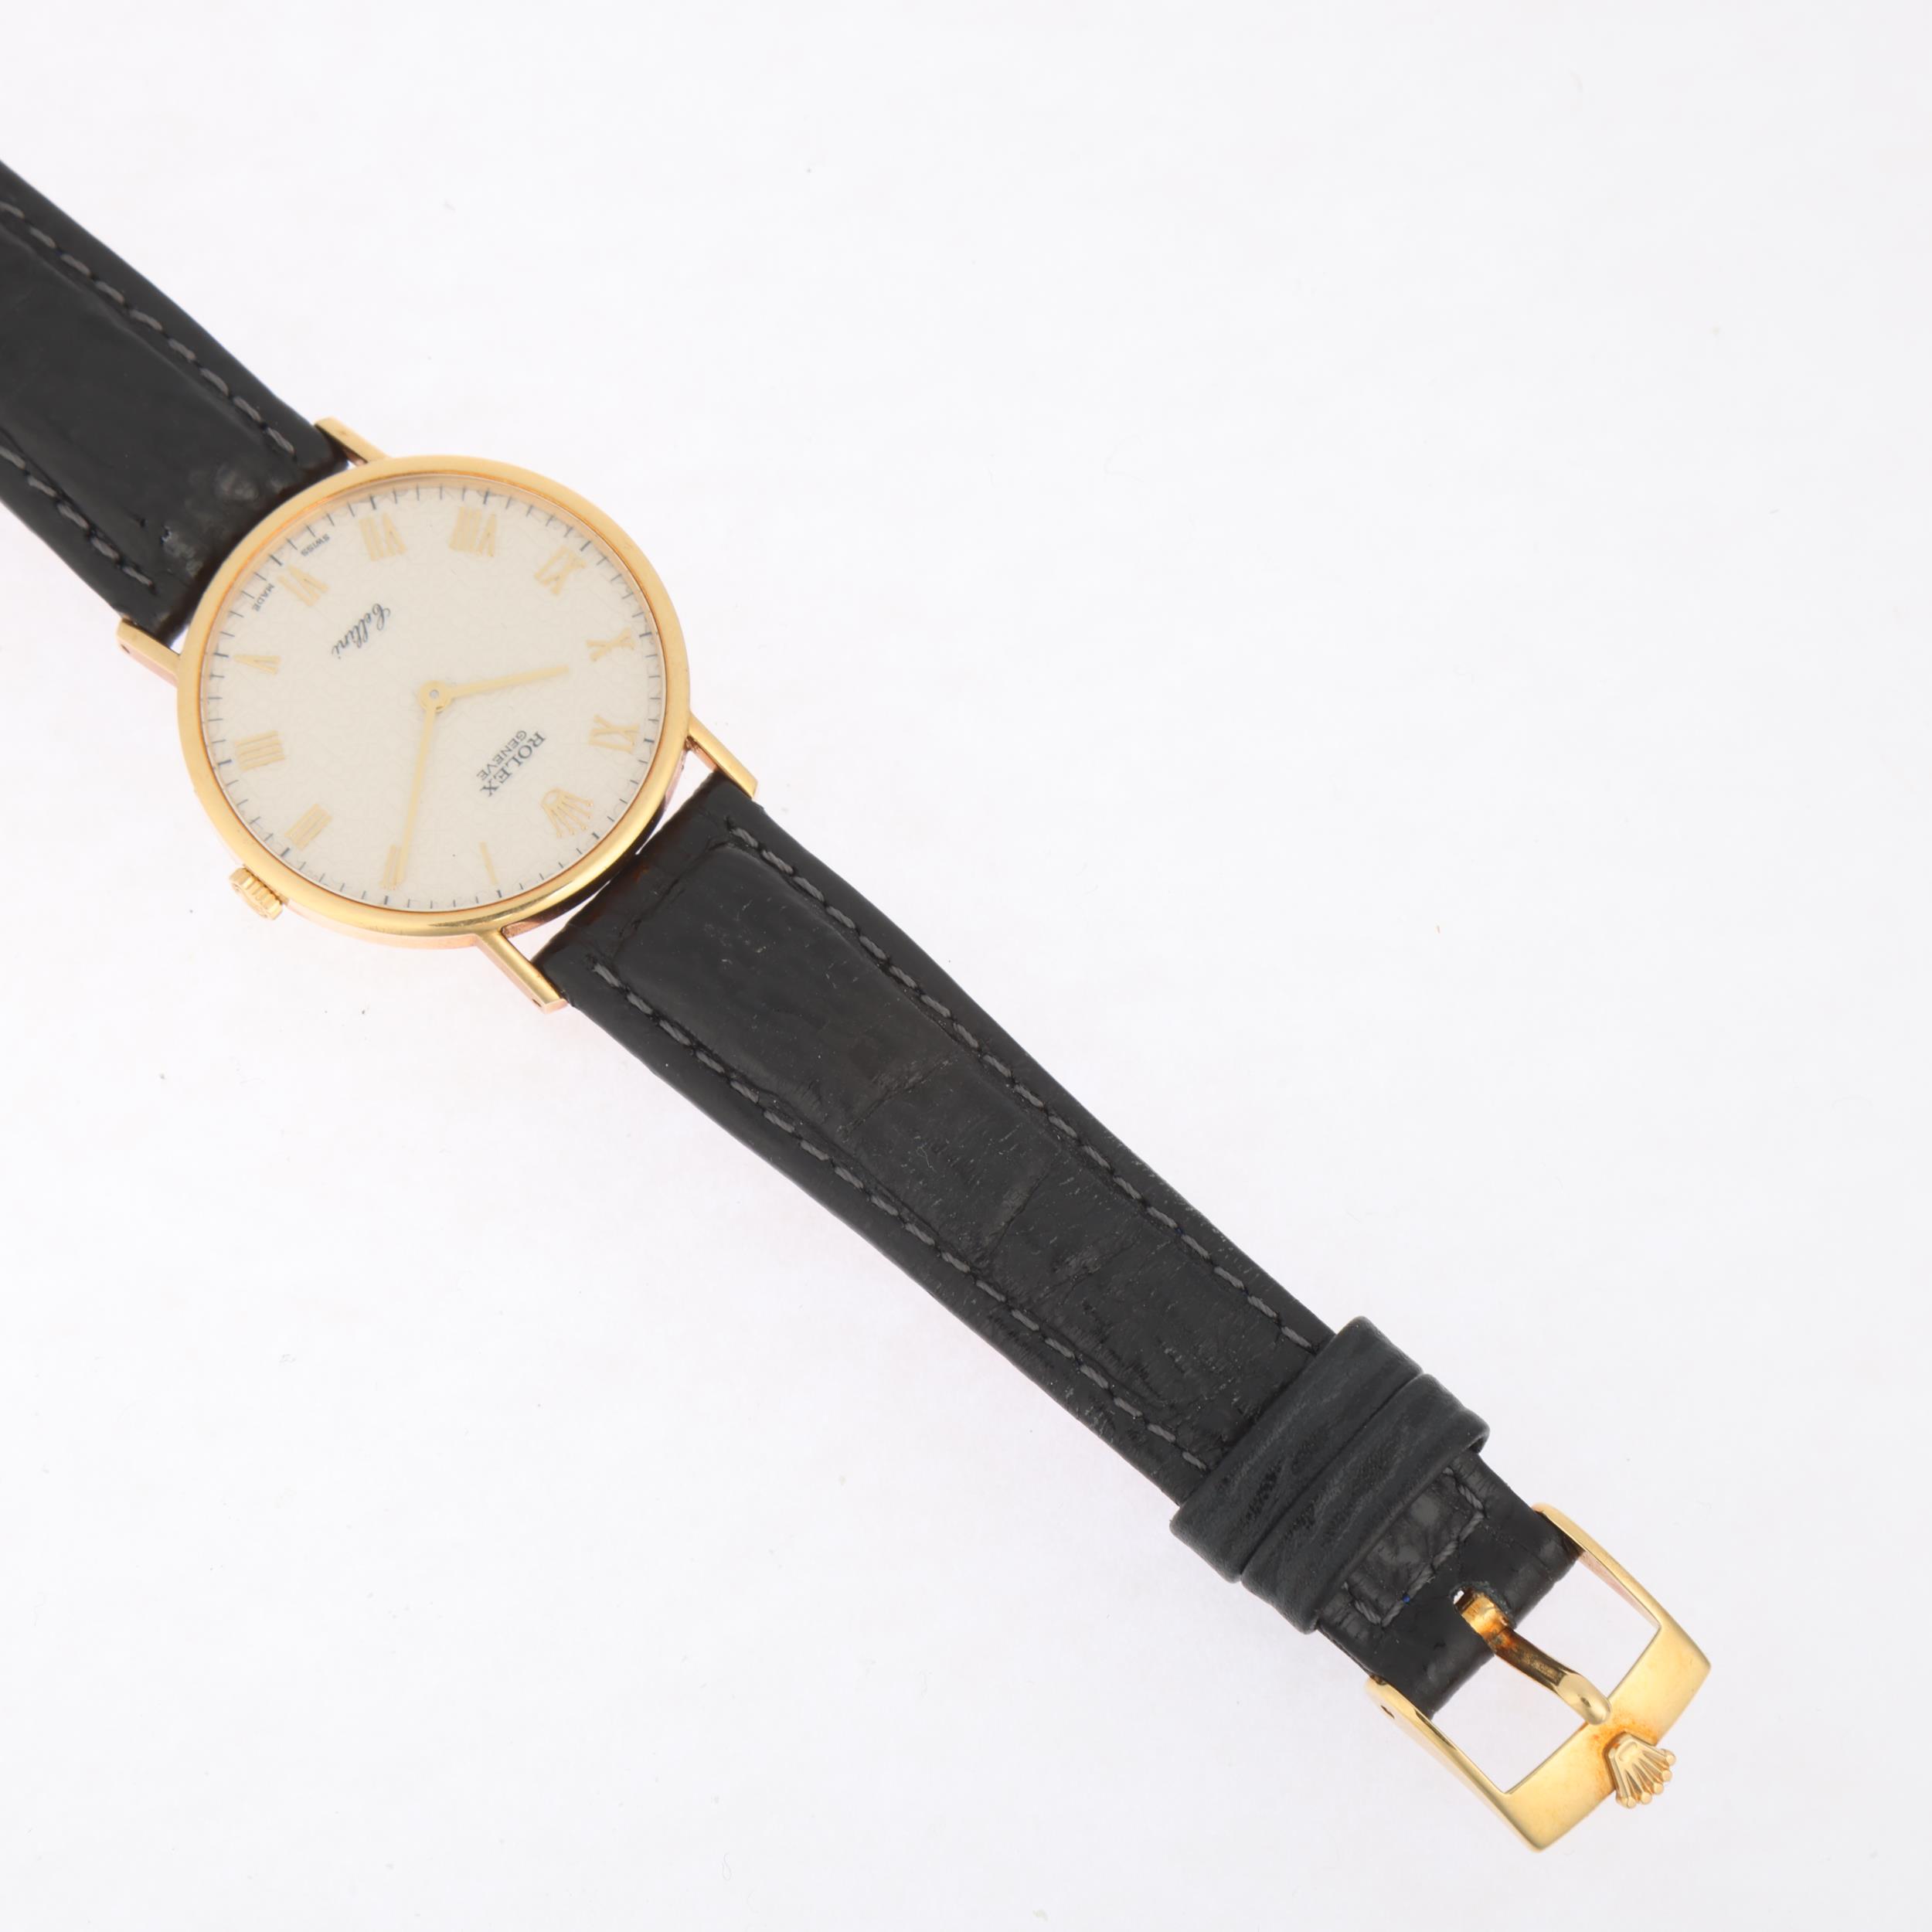 ROLEX - an 18ct gold Cellini mechanical wristwatch, ref. 5112, circa 1988, ivory Jubilee anniversary - Image 4 of 5